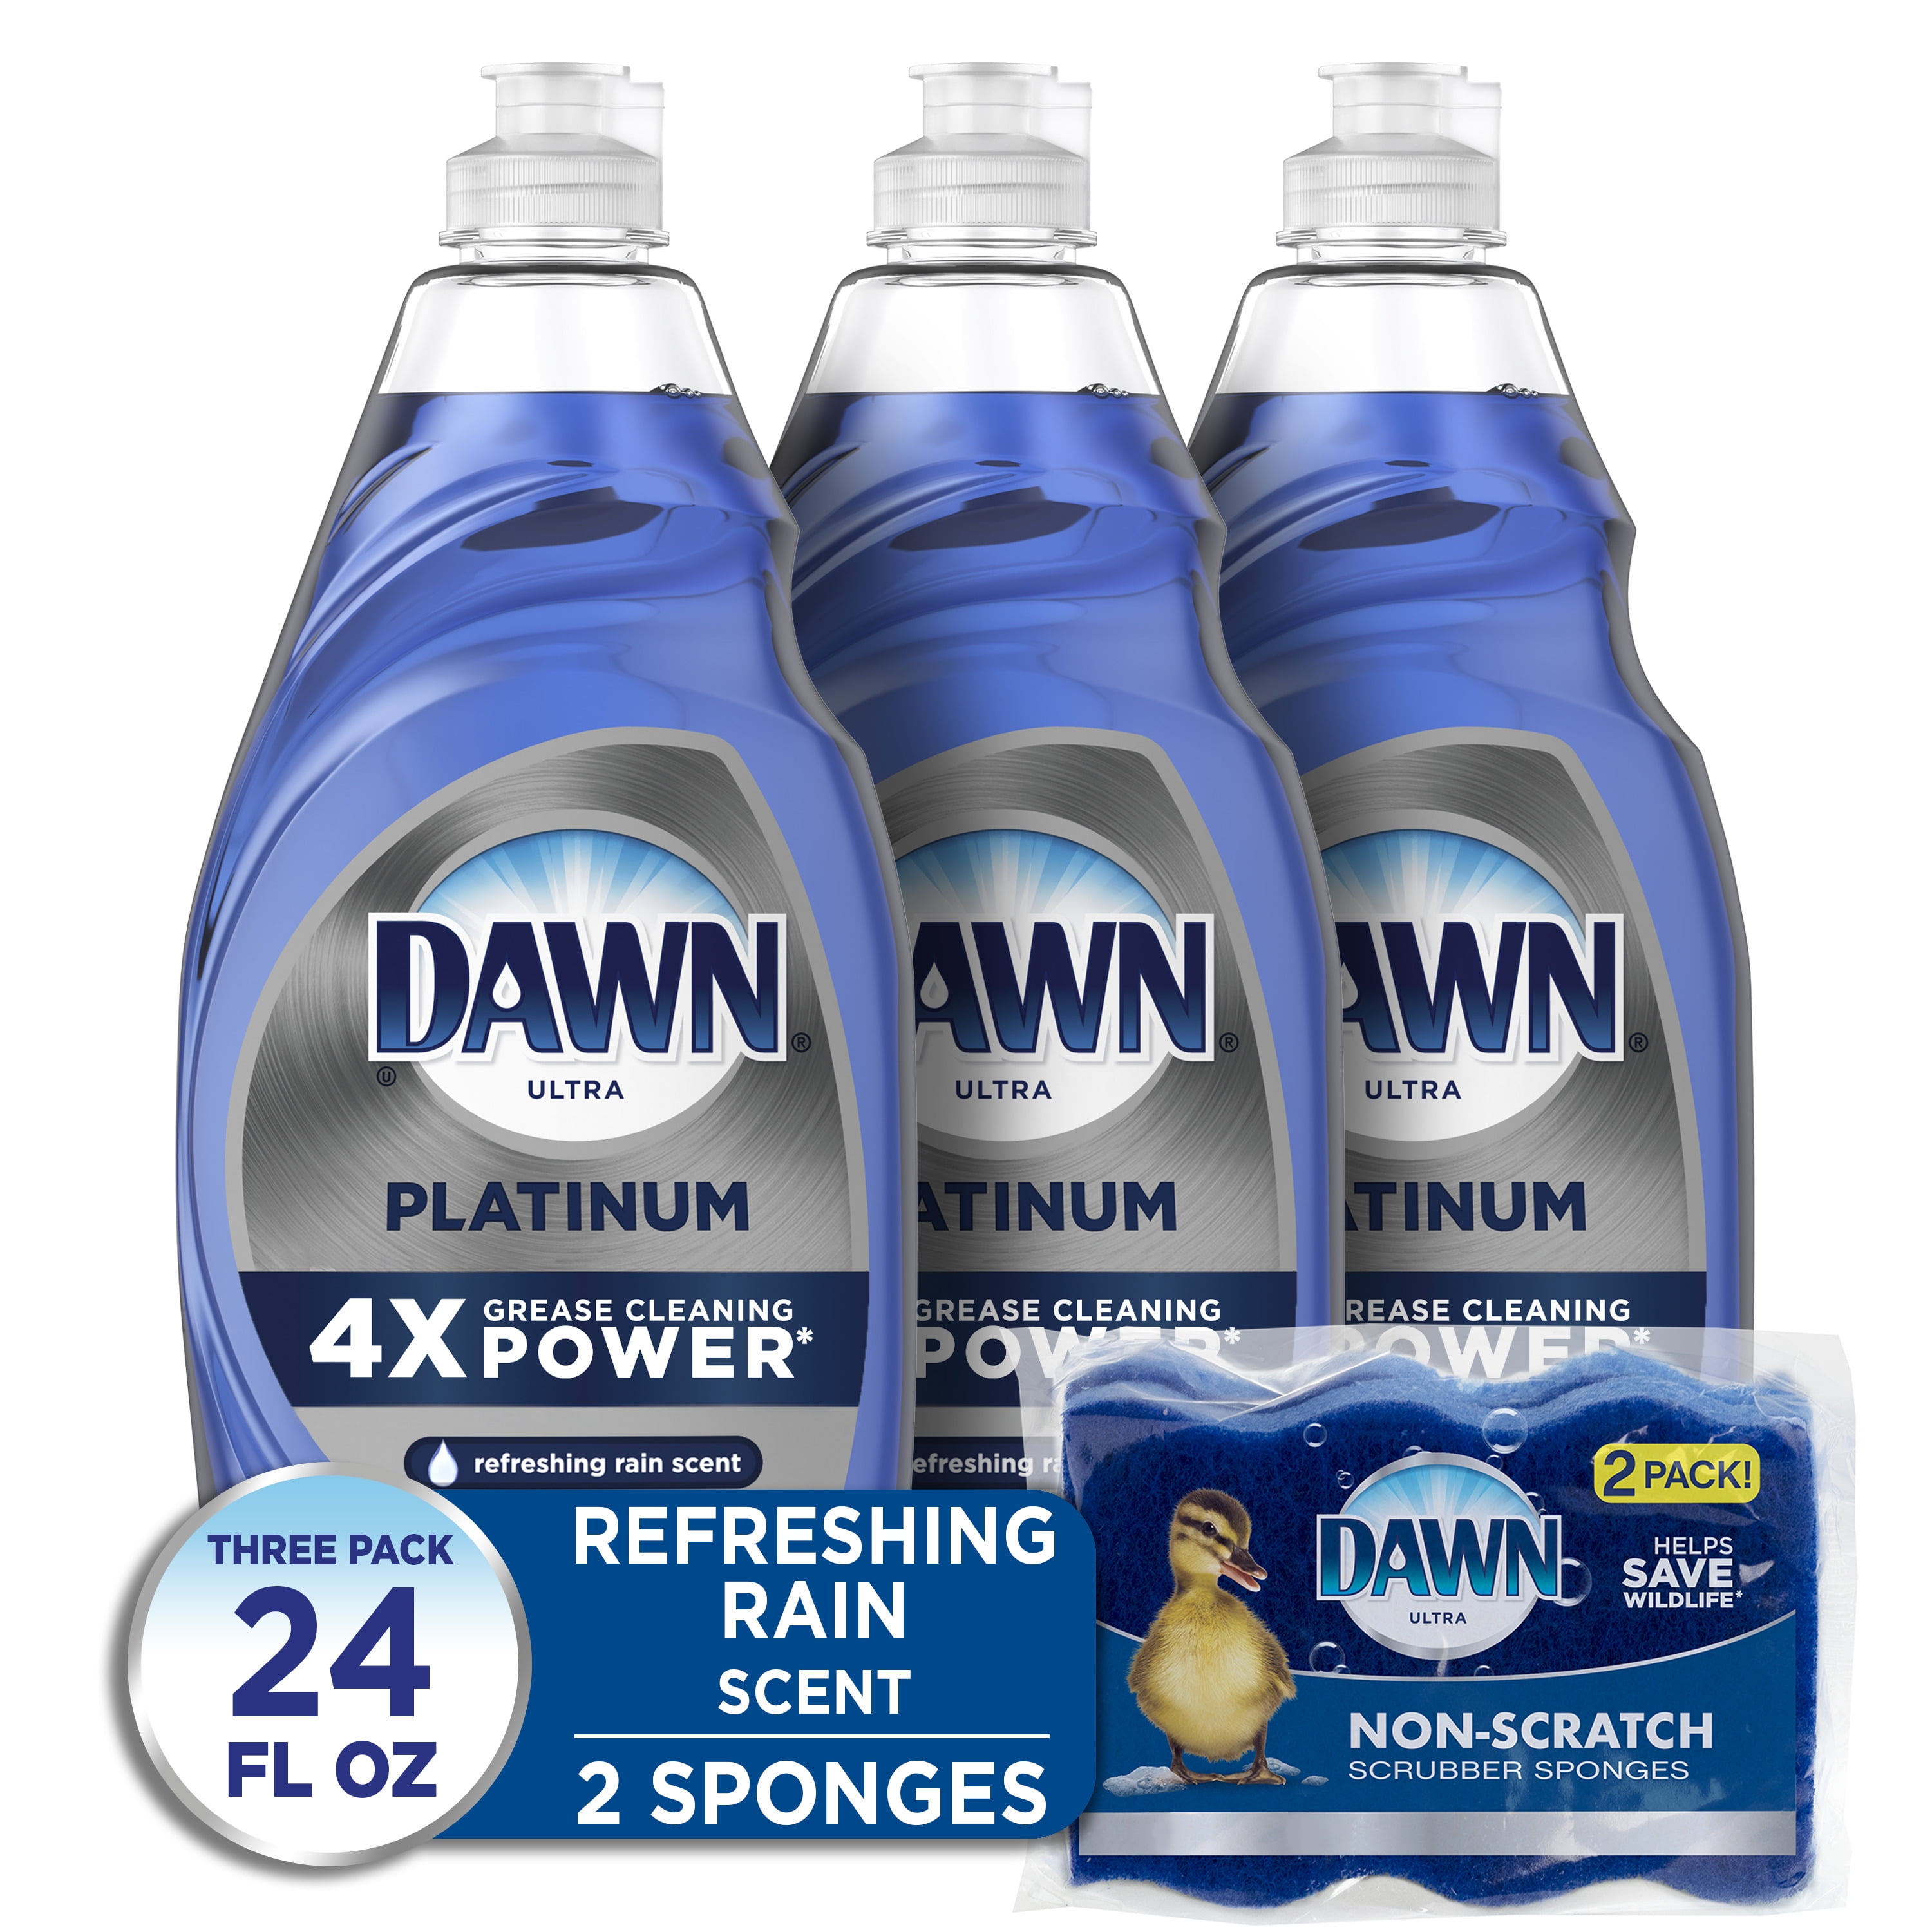 Does Using Dawn Cause Smelly Sponges?